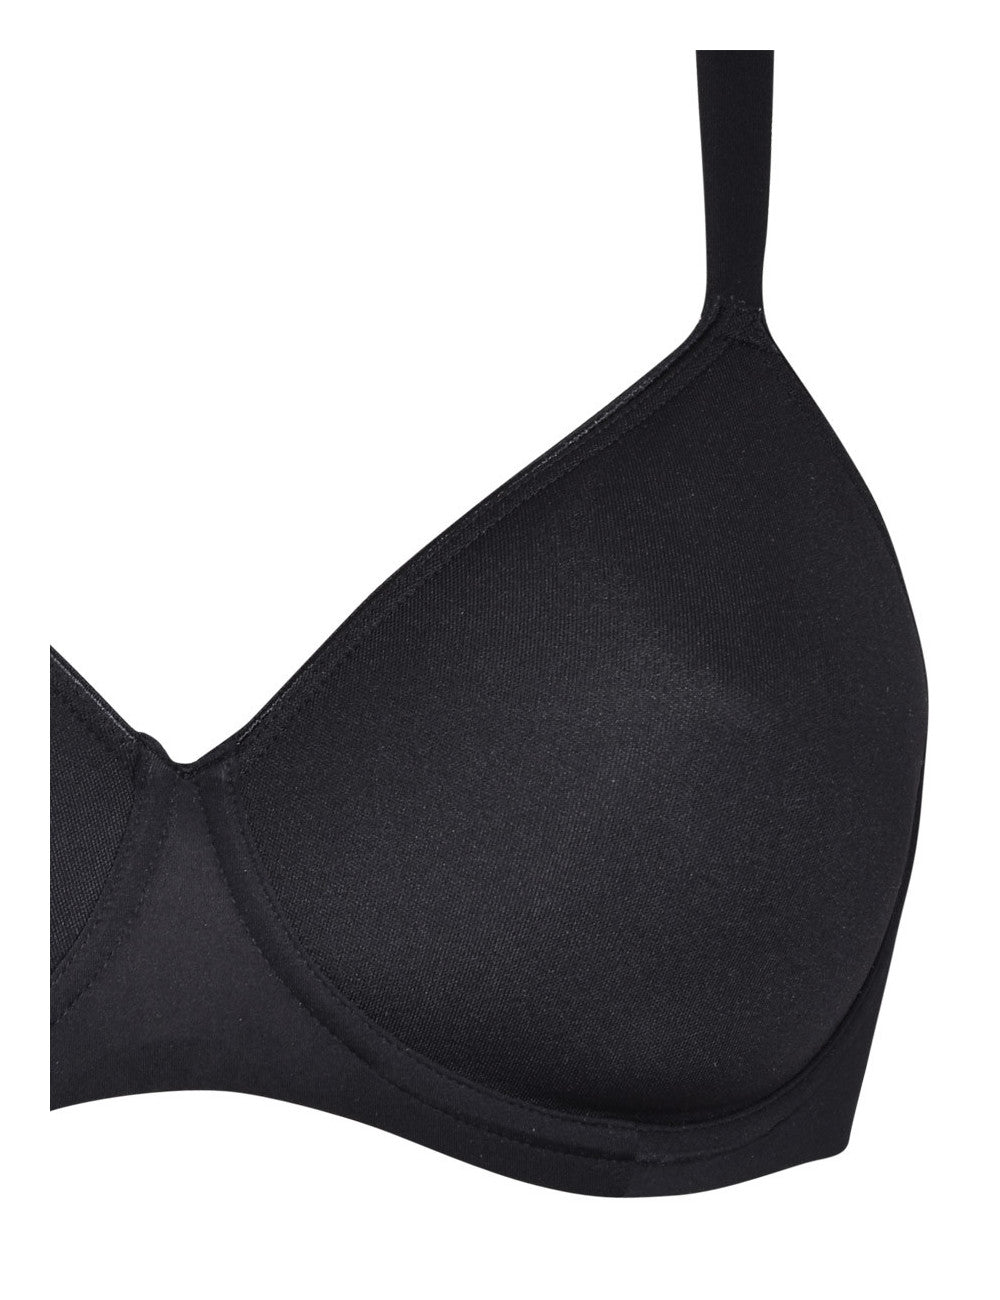 Black, underwire spacer cup bra from the Plus line by SIéLEI from Italy.